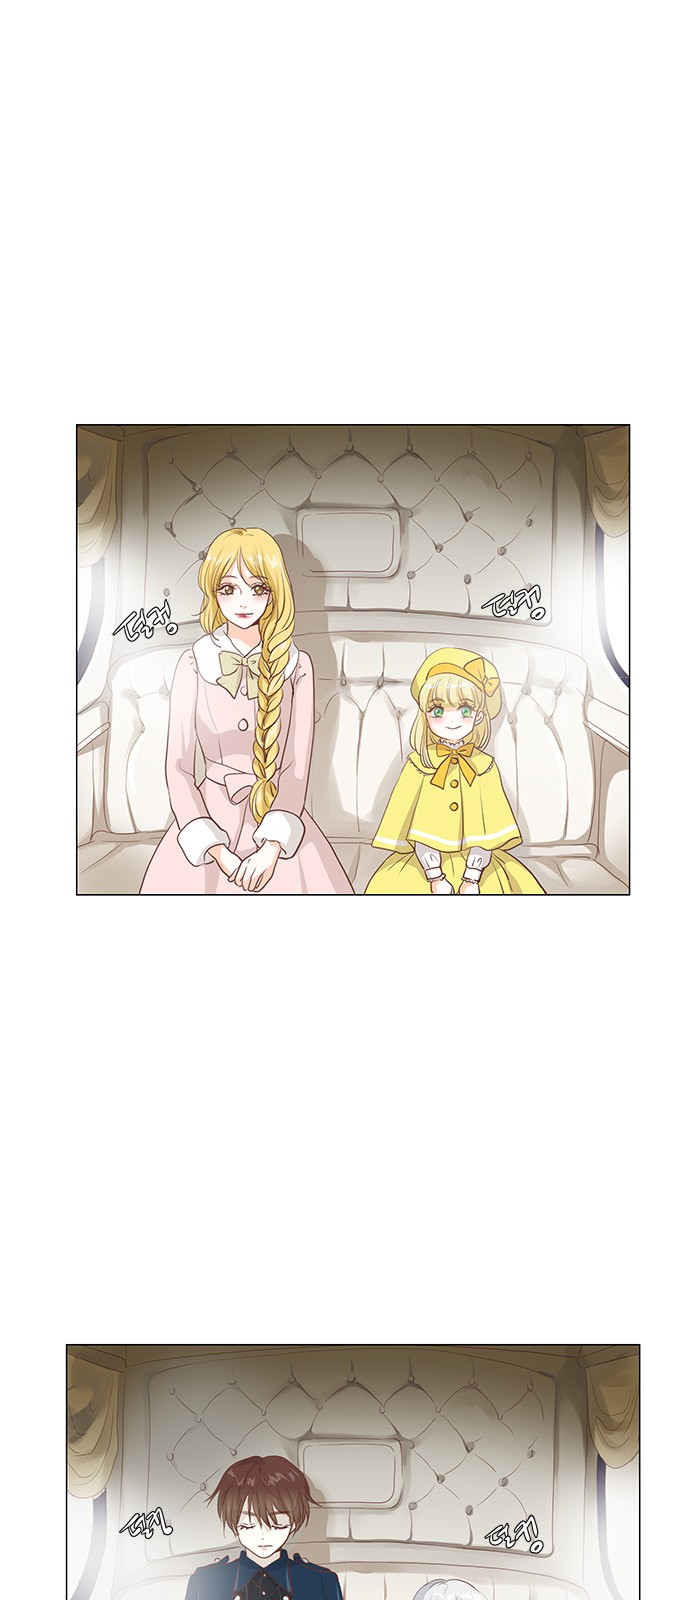 The Matchmaking Baby Princess - Chapter 50 - Page 1